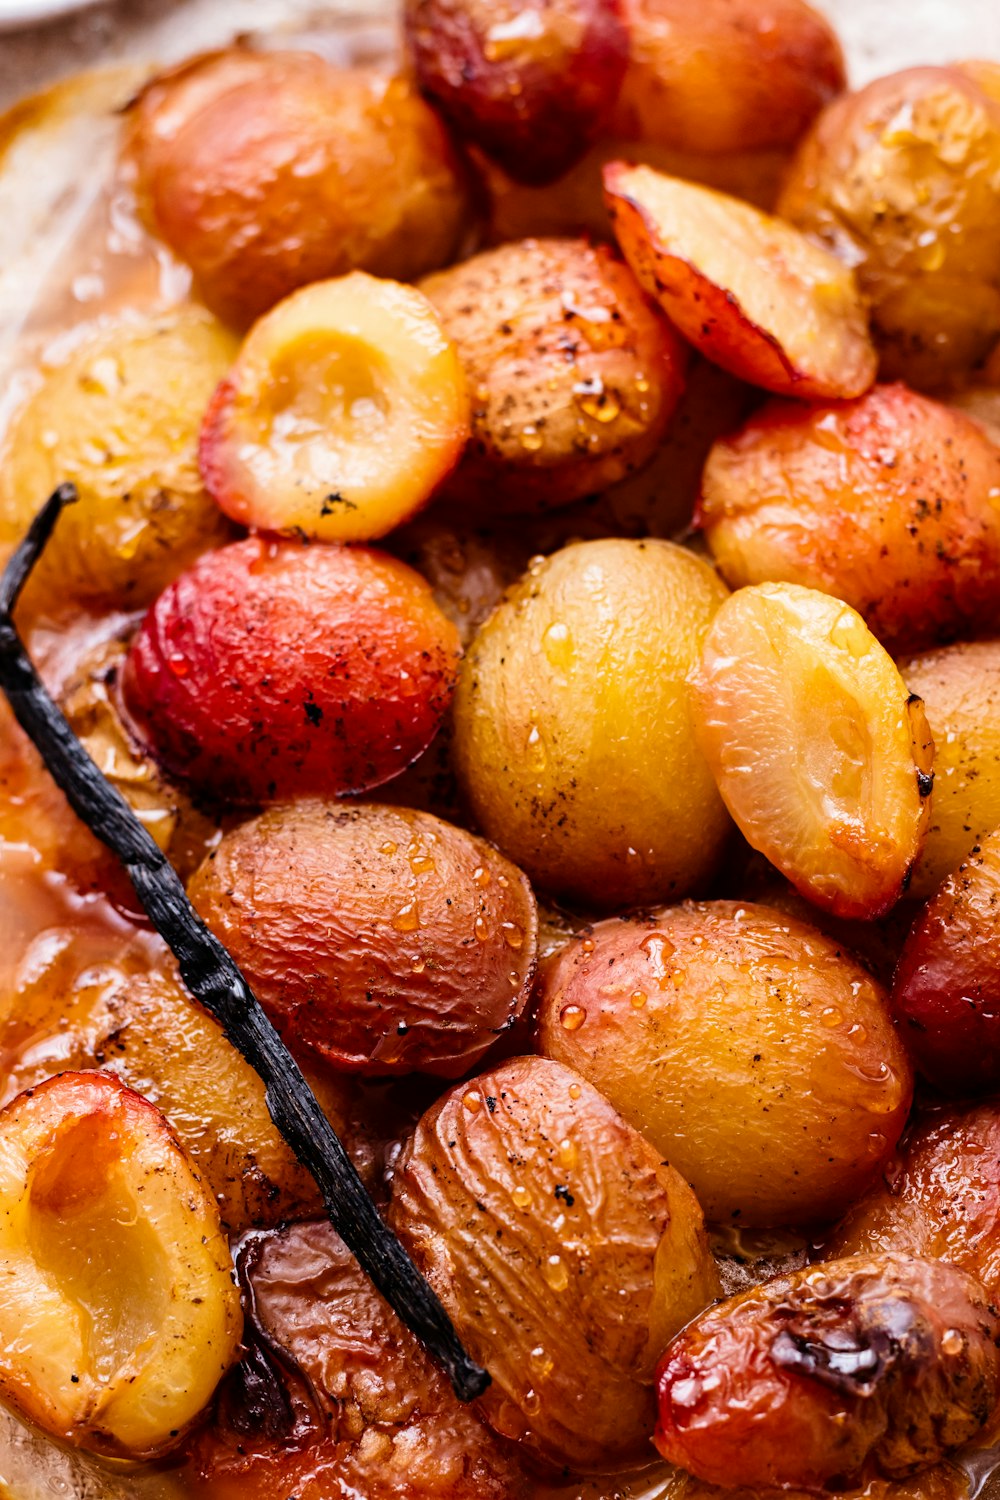 a close up of a plate of food with potatoes